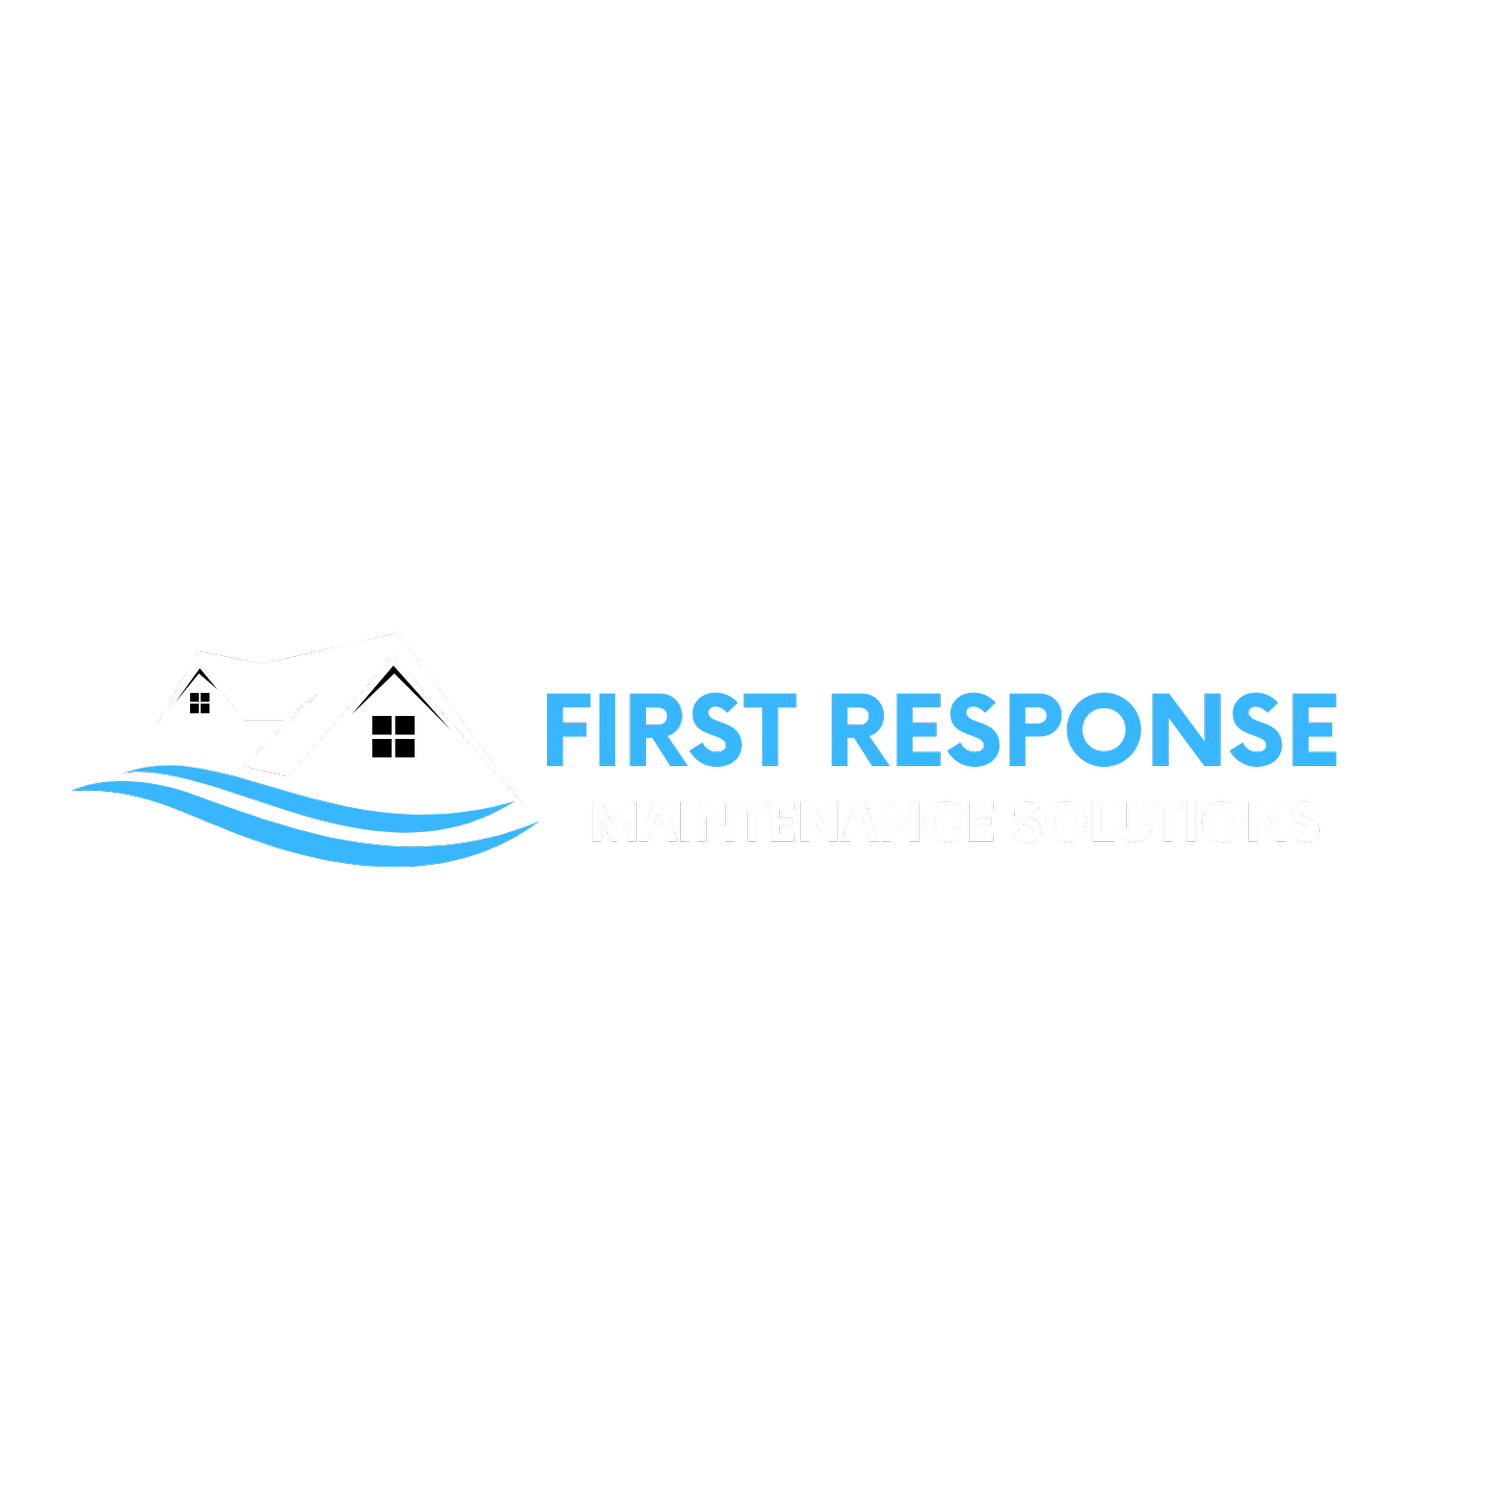 First Response Maintenance Solutions